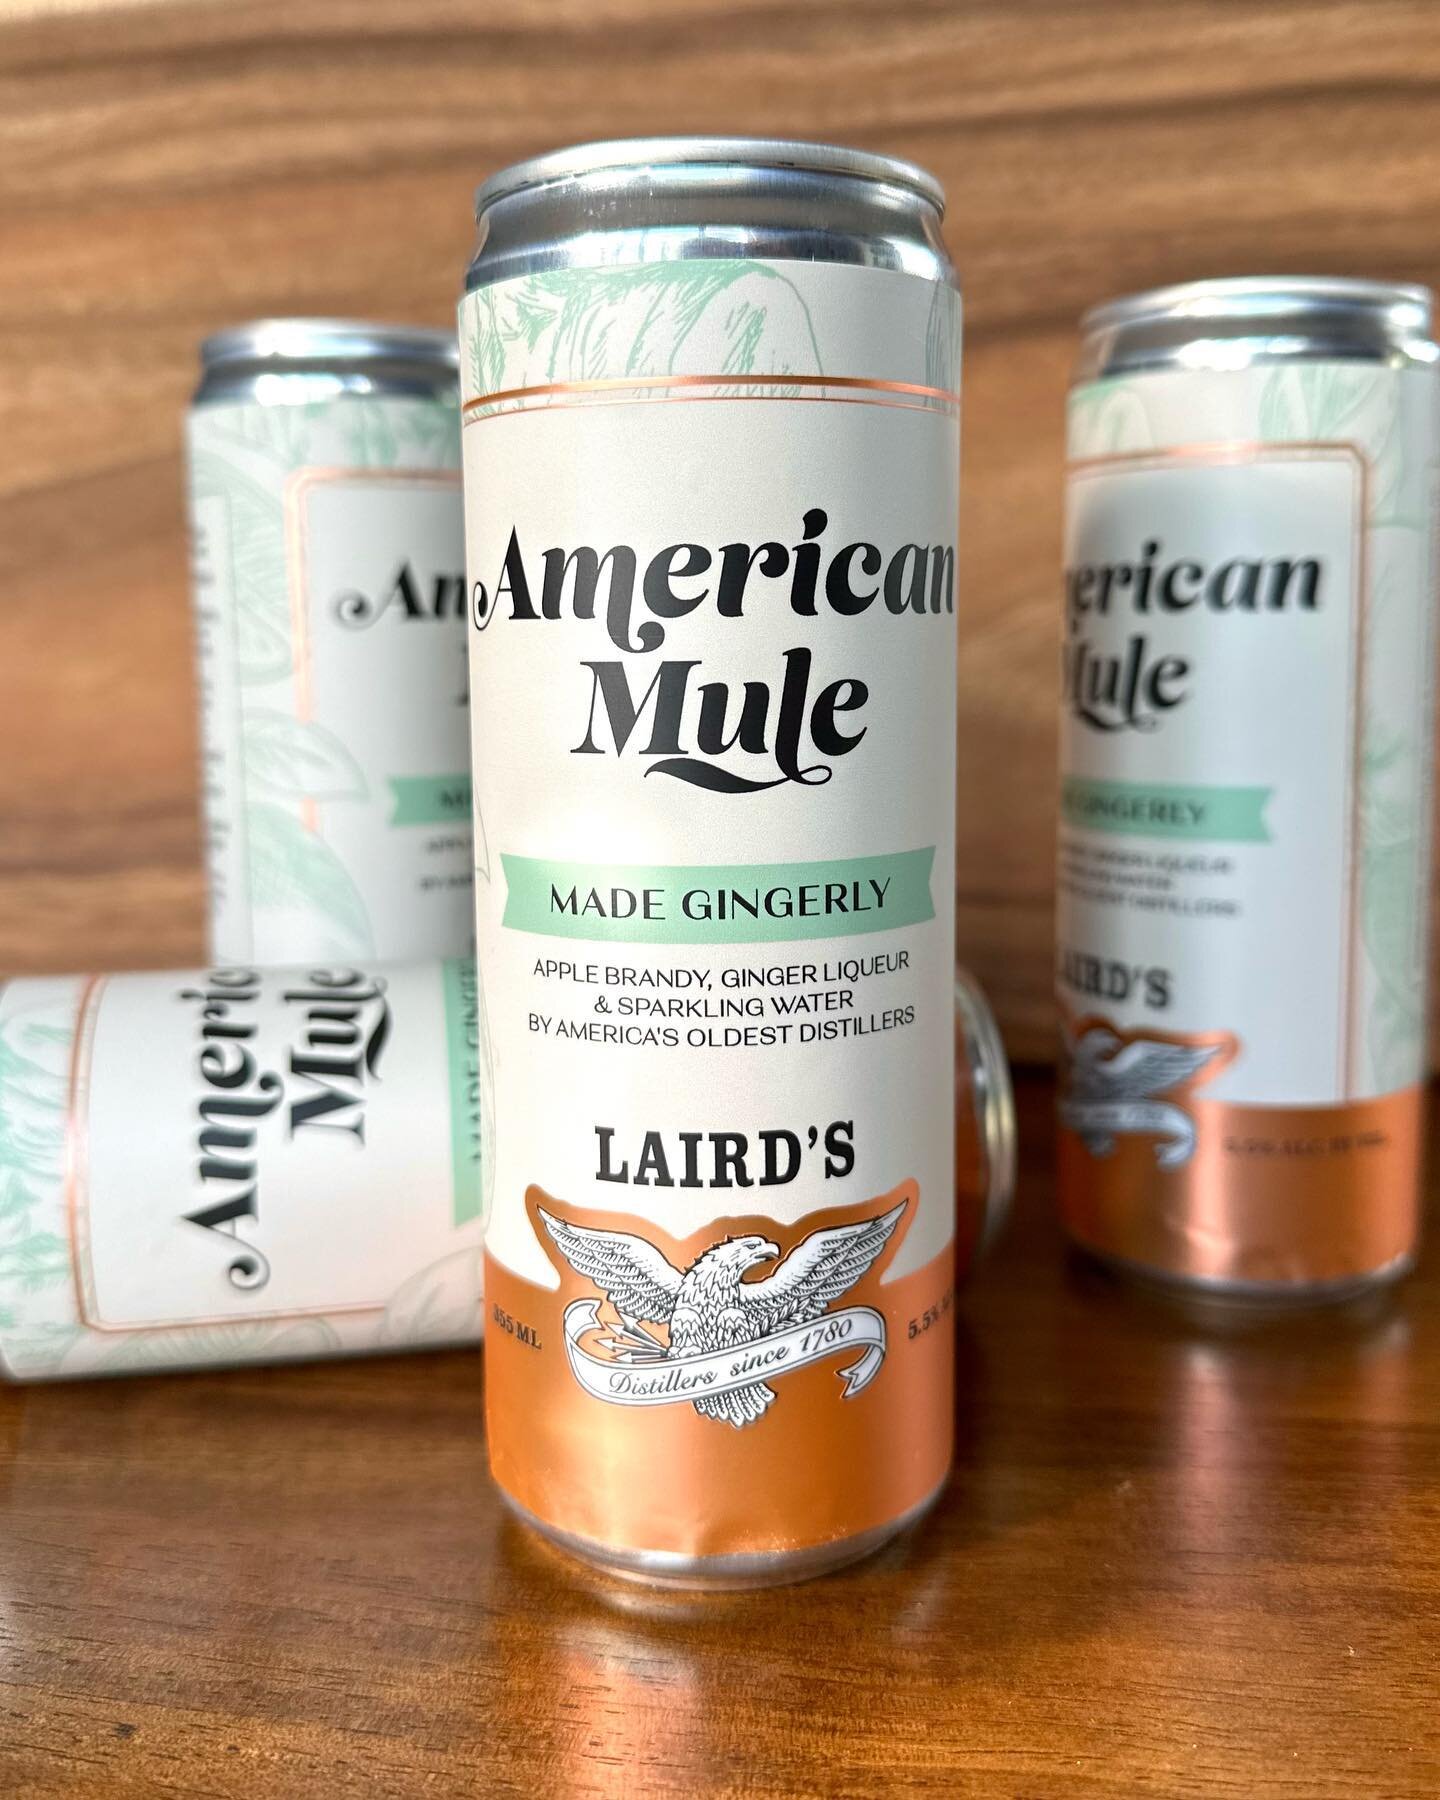 Everyone knows a Moscow Mule, but @lairdsapplejack is launching their American Mule soon, with an Apple Brandy base mixed with ginger and lime. The label design was a fun one to work on, combining elements that represent Laird&rsquo;s distilling hist